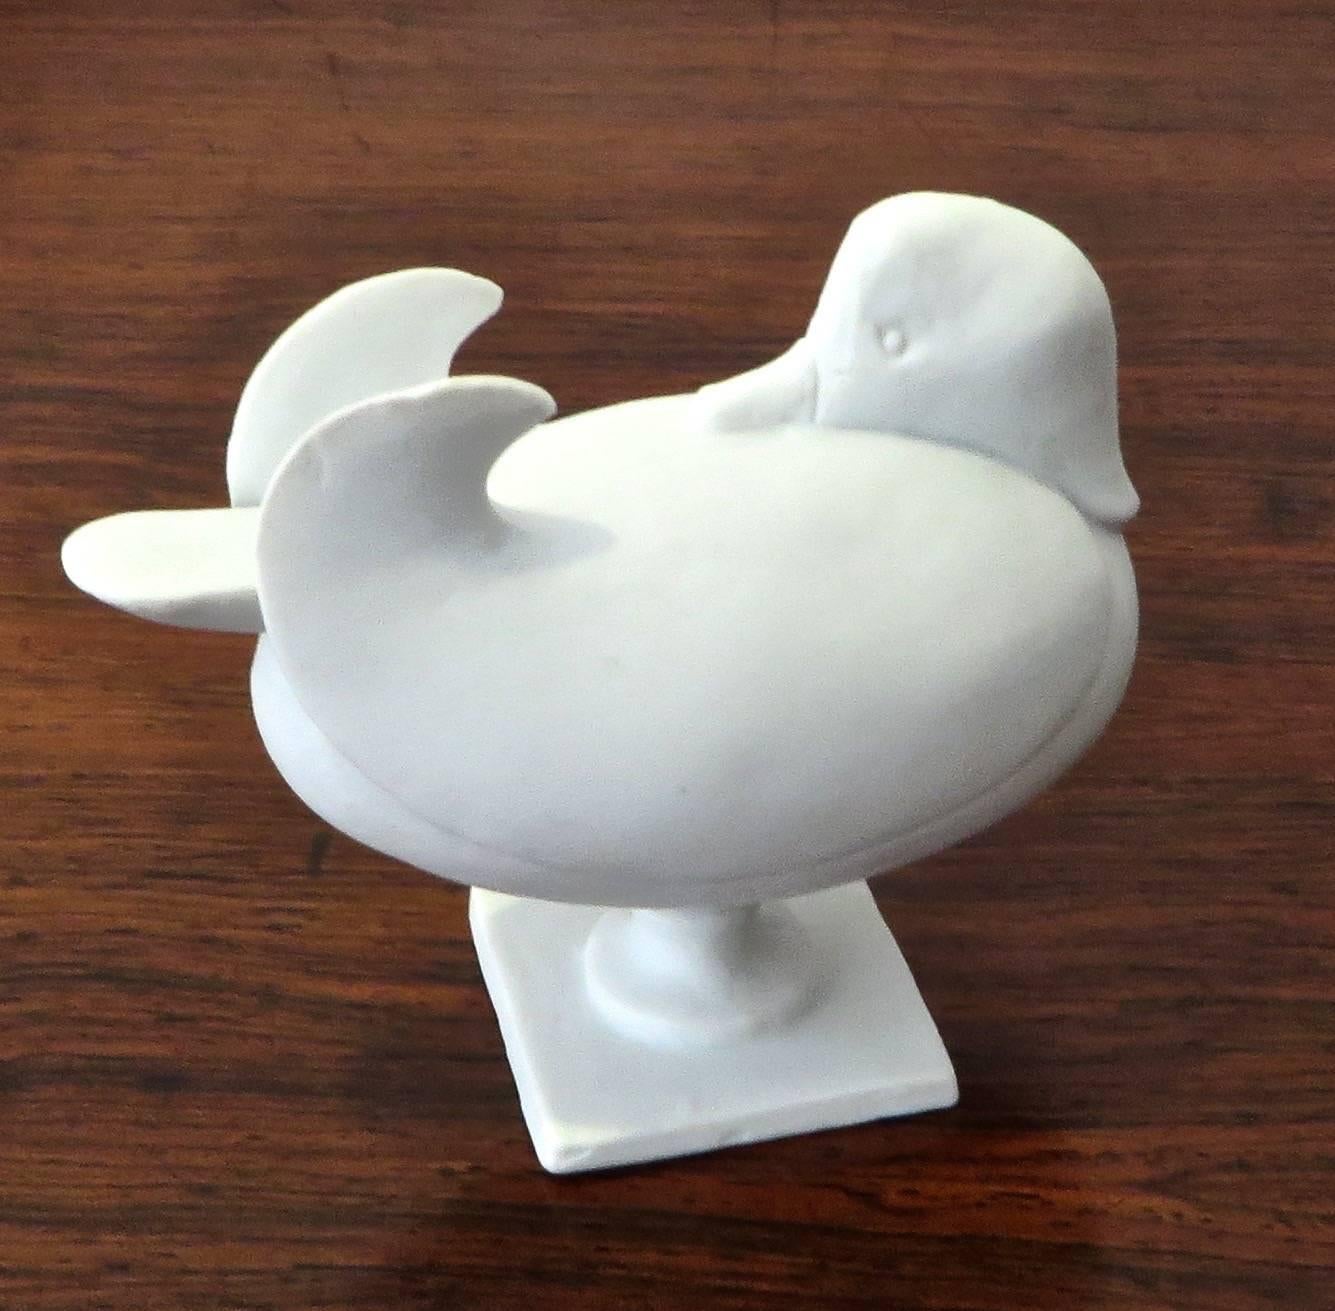 Late 20th Century French Porcelain Salt Cellars by Claude Lalanne